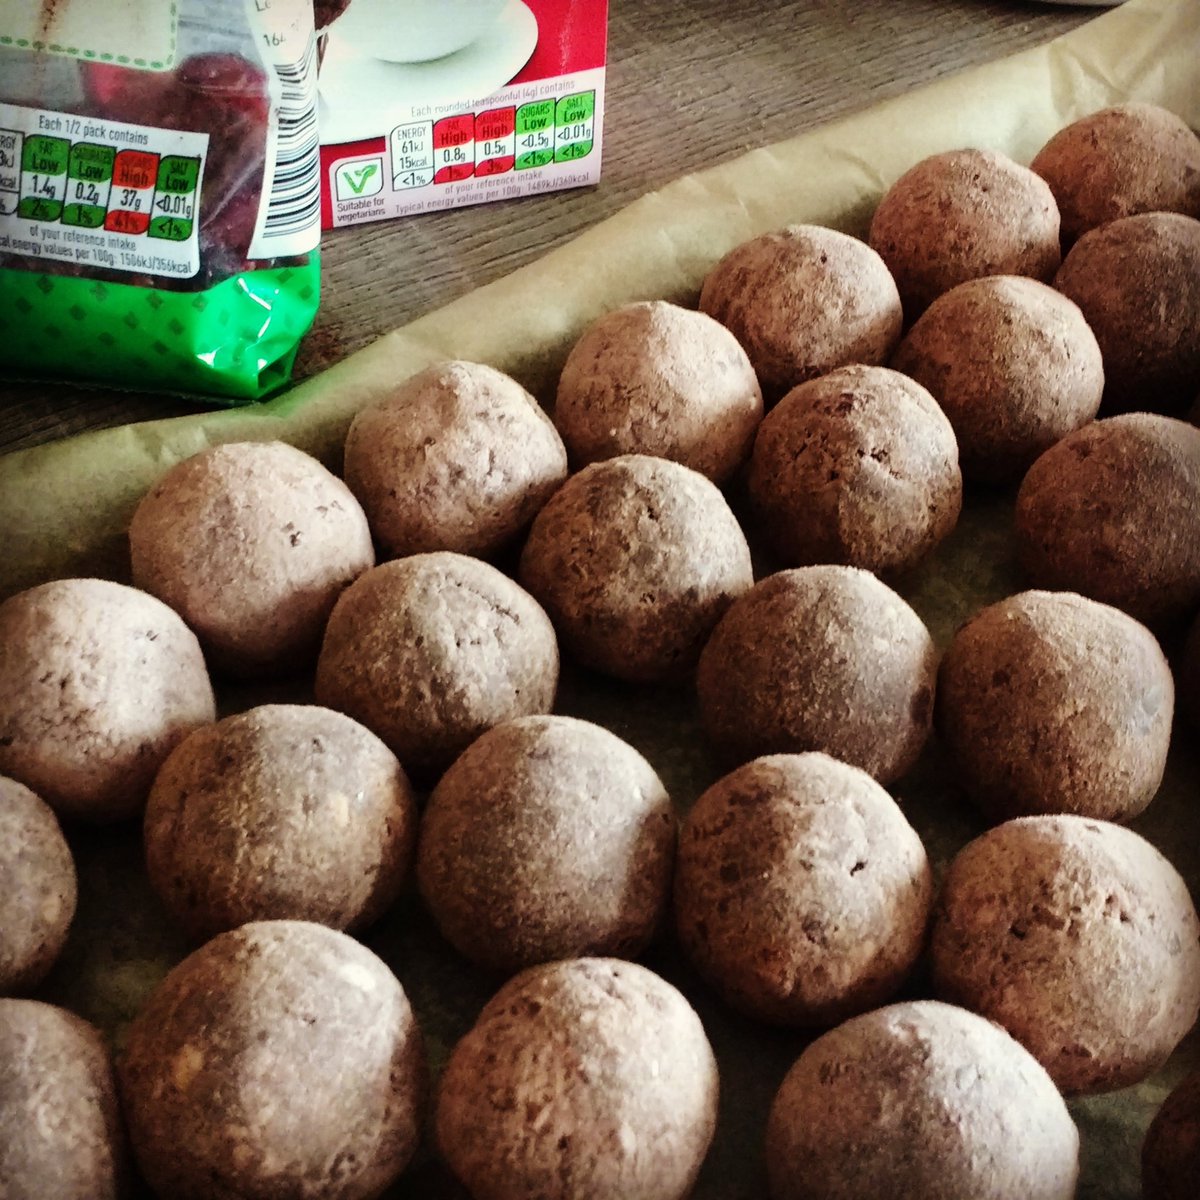 Making Mud Bites 😁 There must be an event on this weekend 🤔😜 #lookingaftertheteam #macmillan #mightyhike